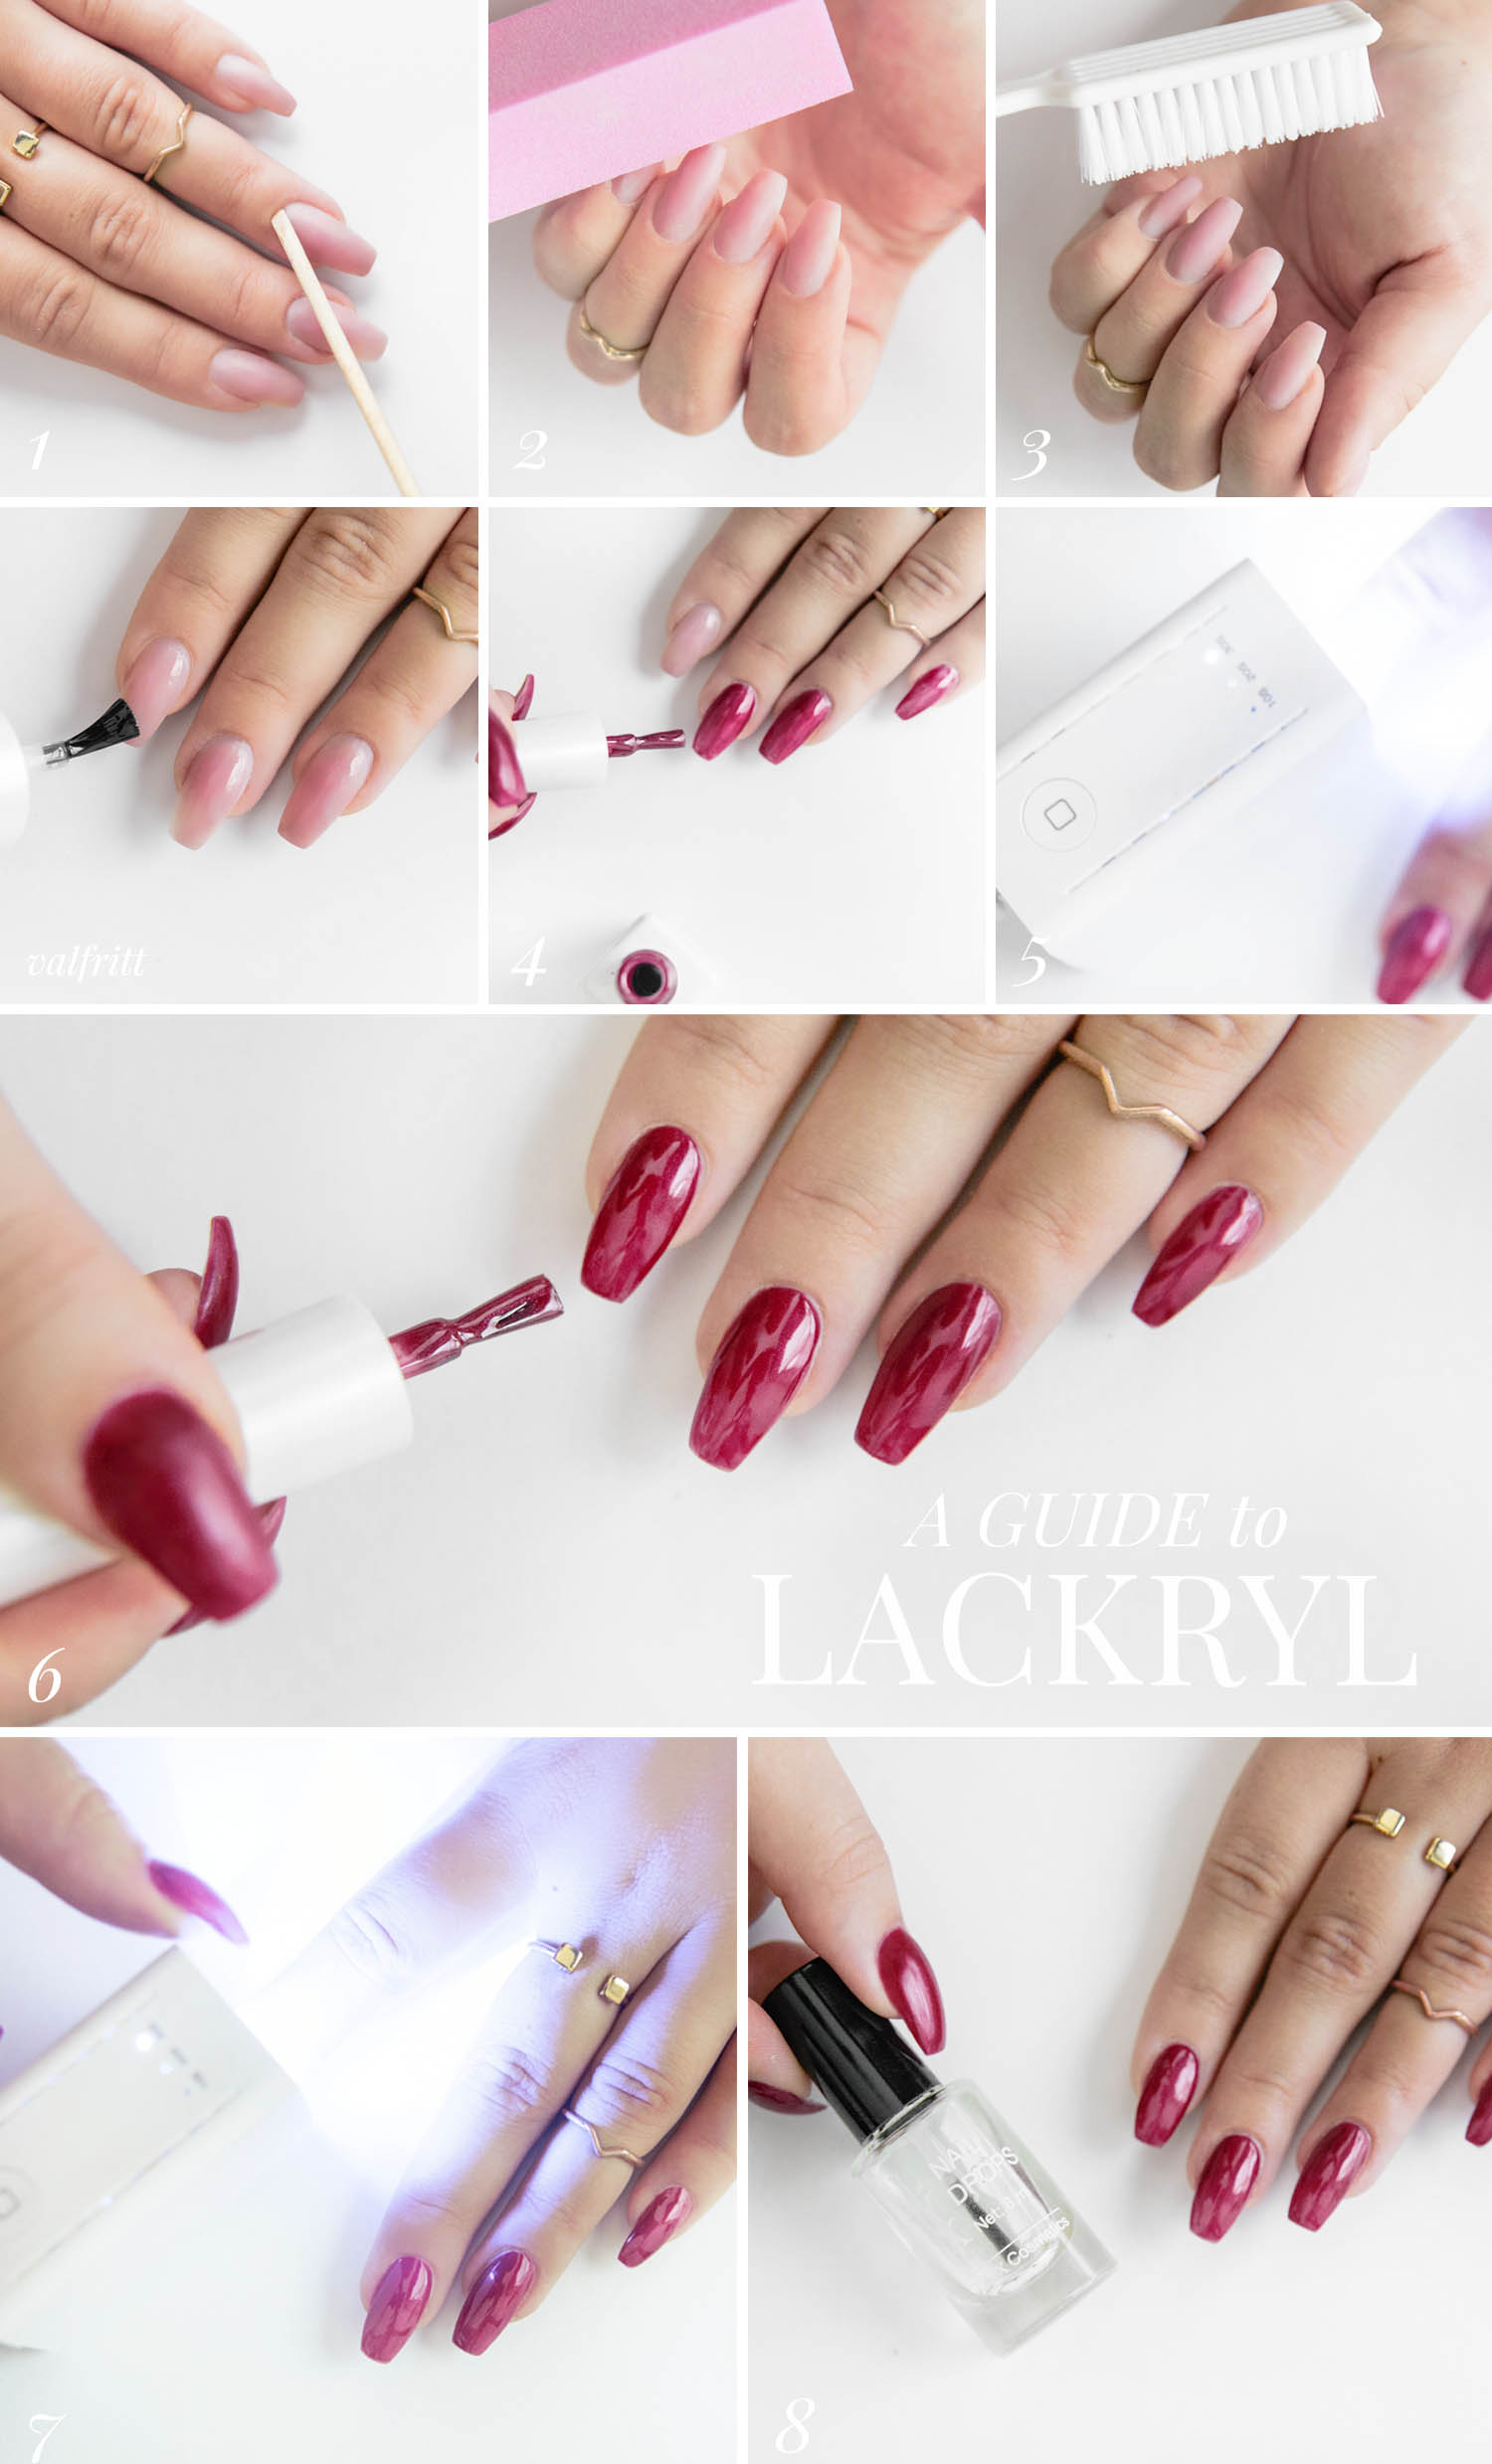 A Guide to Lackryl - All-in-One Acrylic Manicure at Home